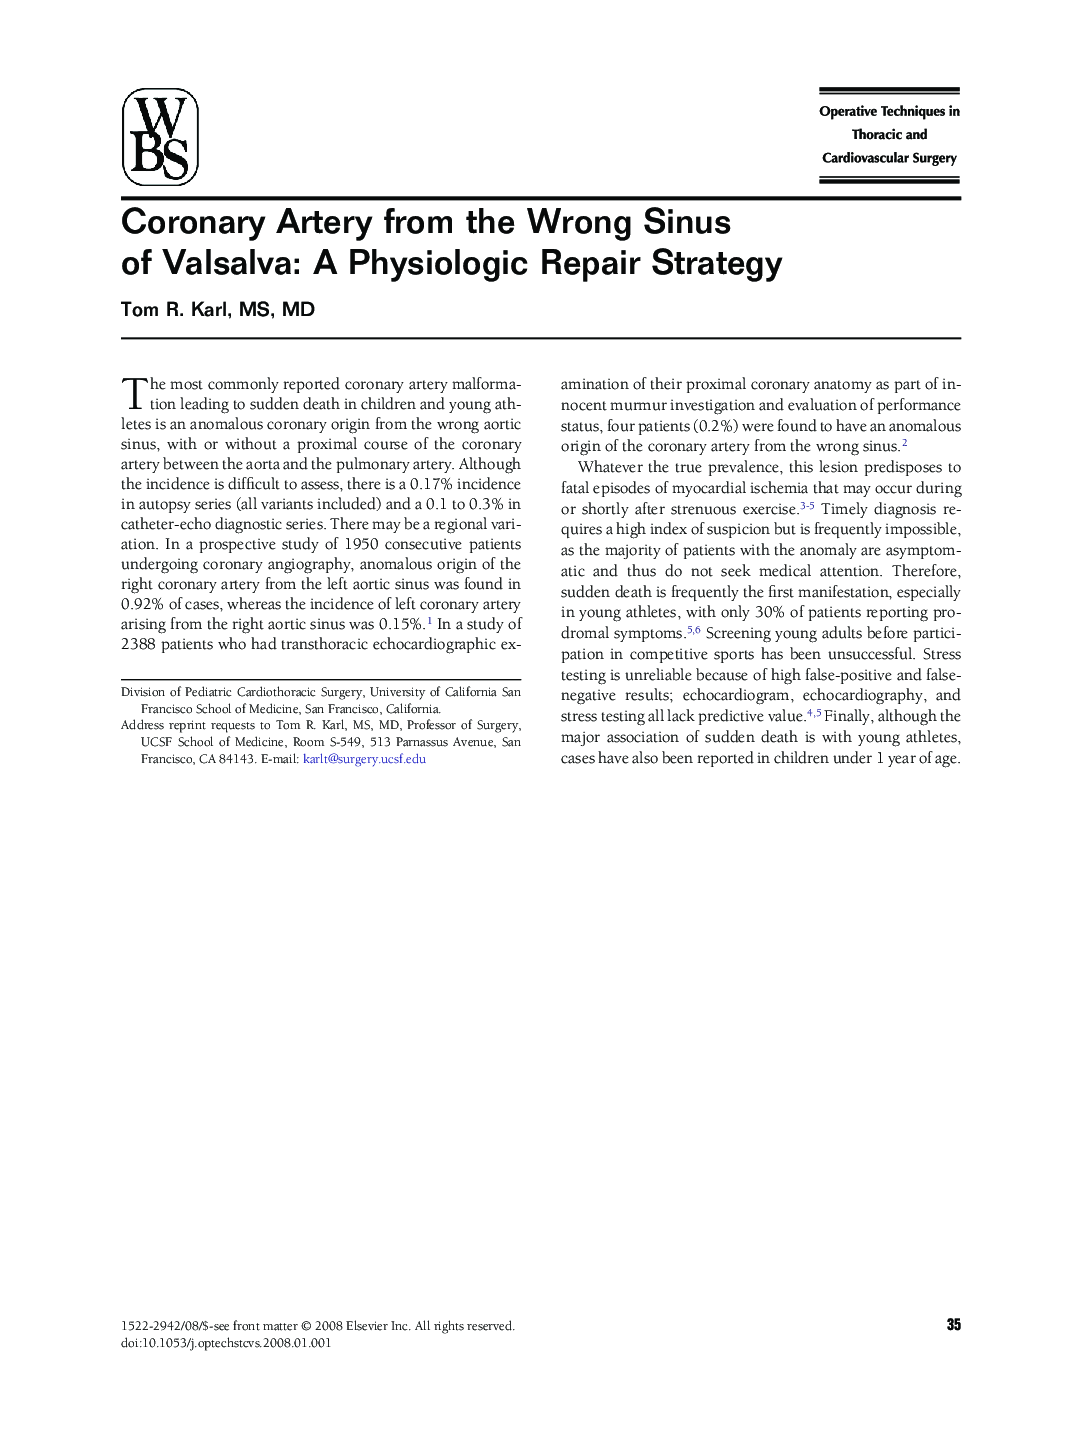 Coronary Artery from the Wrong Sinus of Valsalva: A Physiologic Repair Strategy